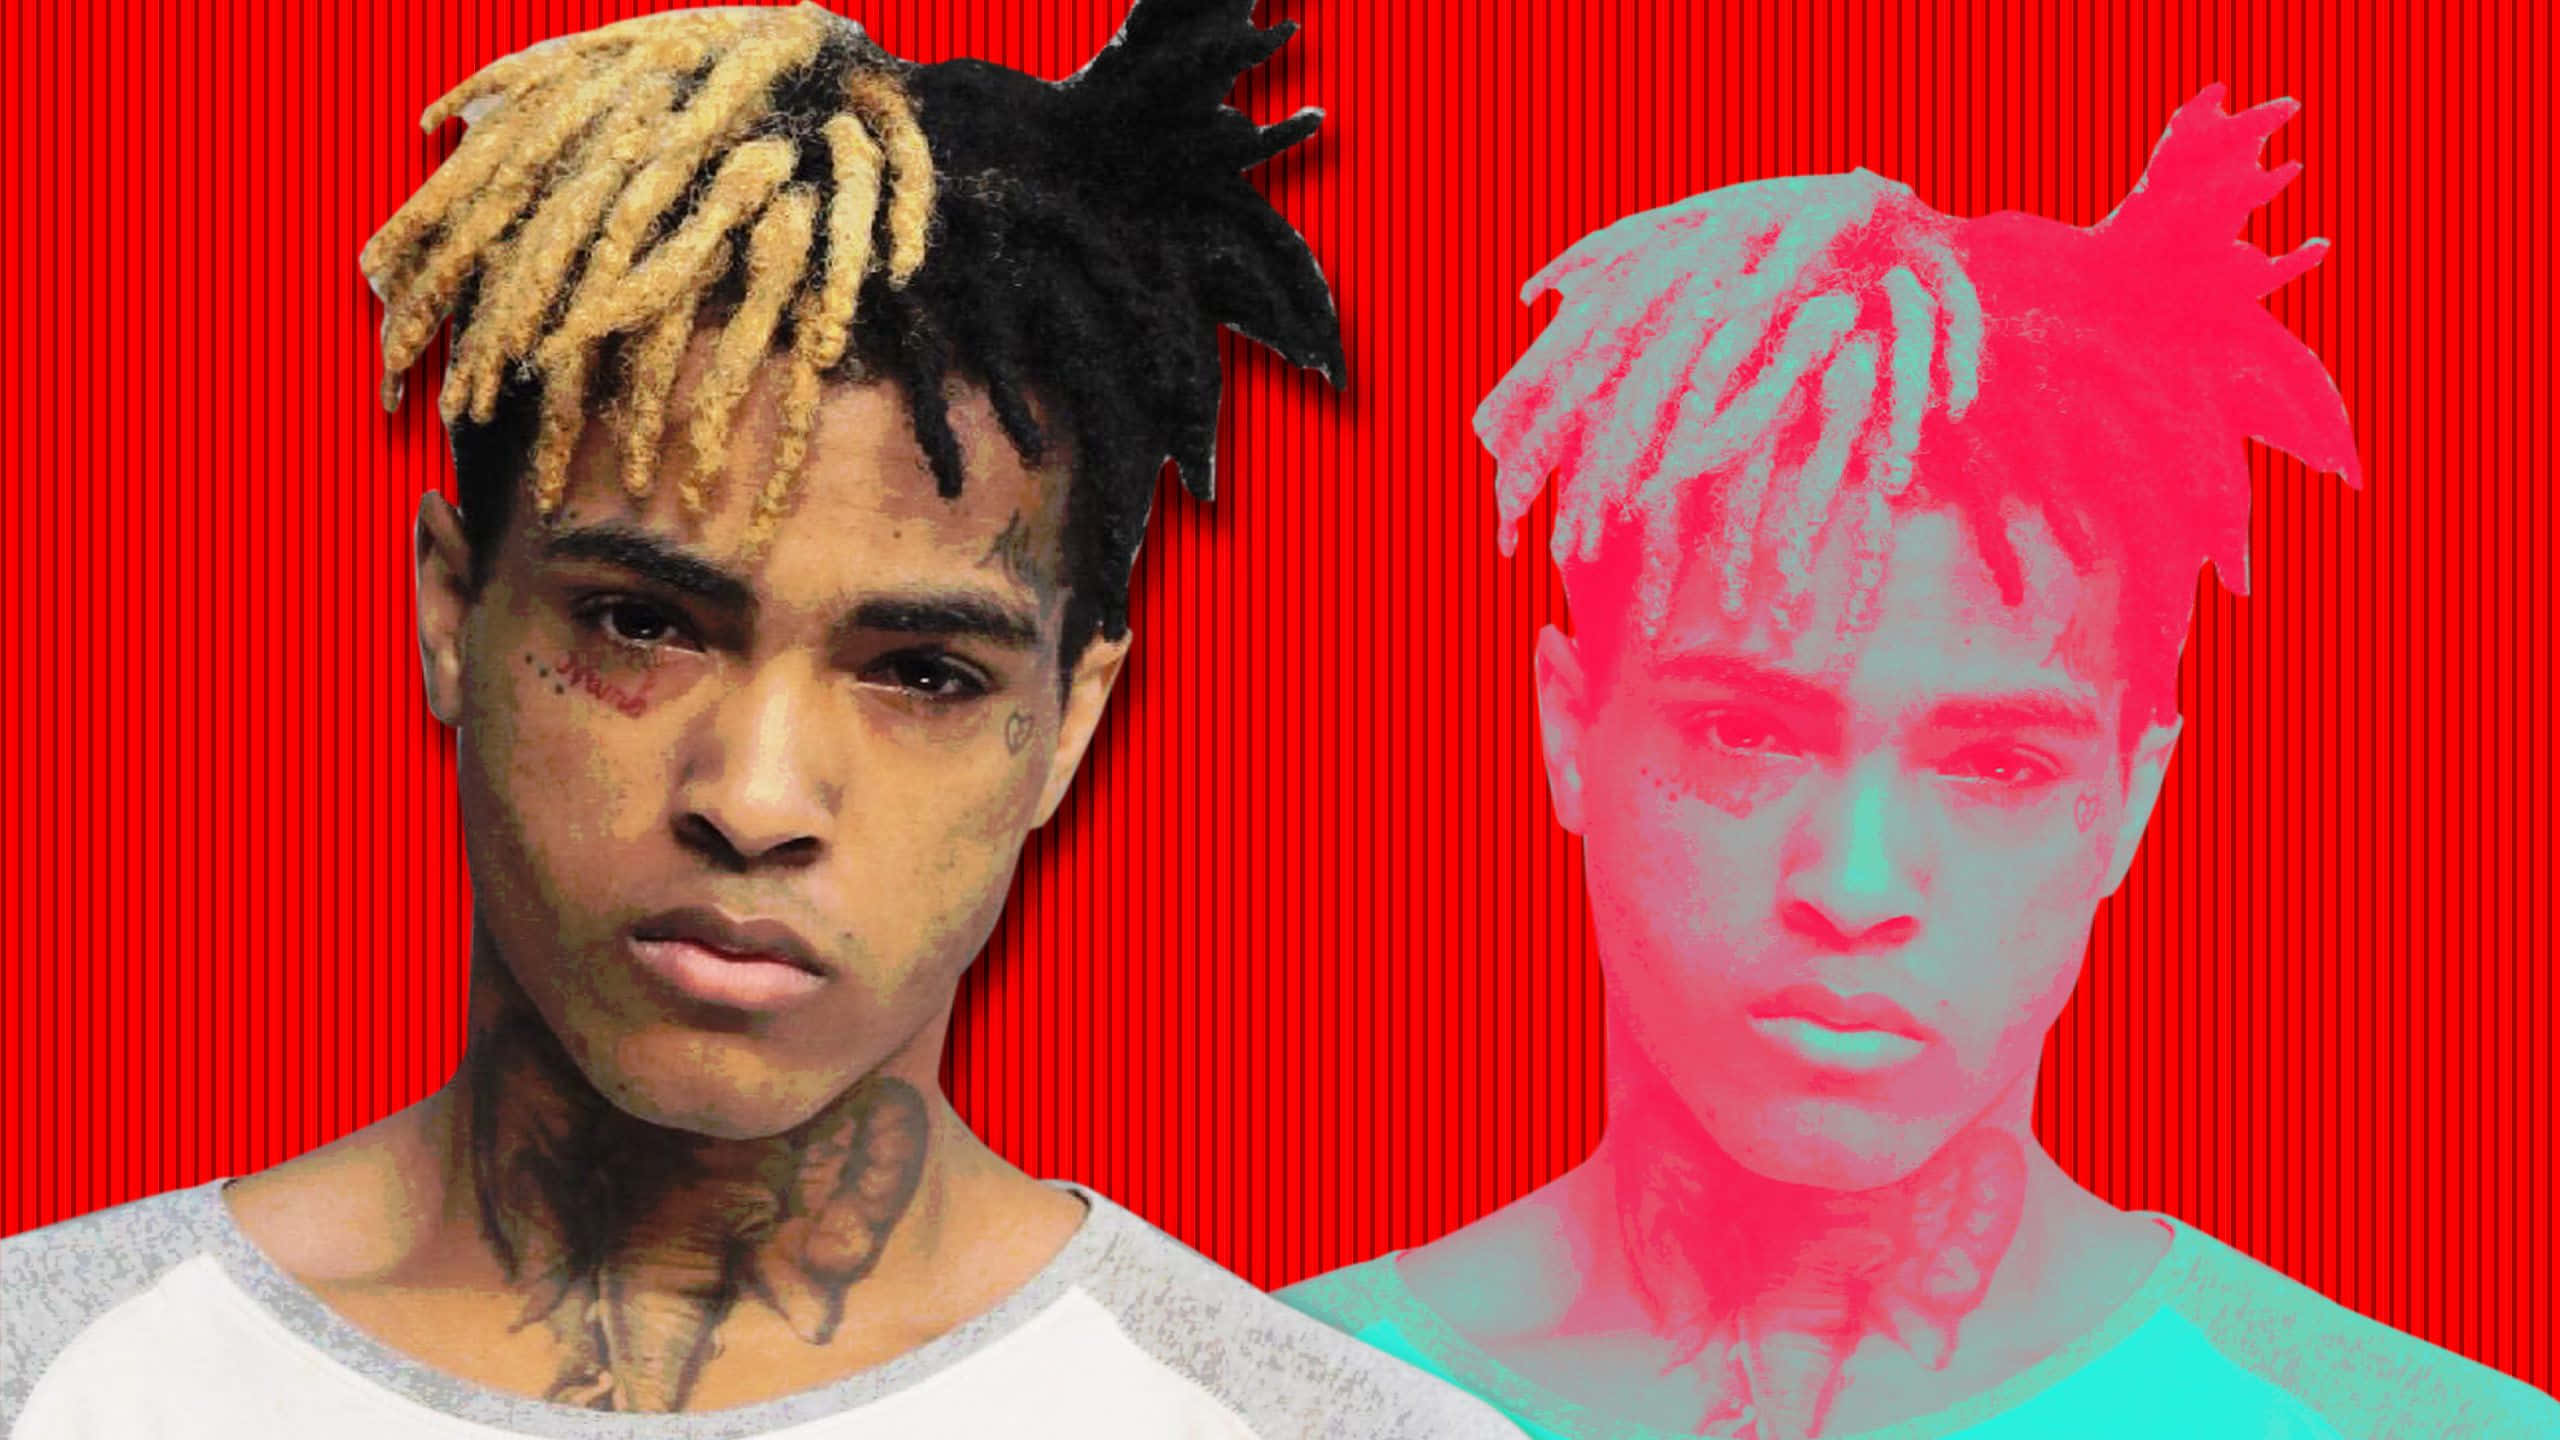 "Making waves with his incomparable sound, XXXTentacion is changing the game!"